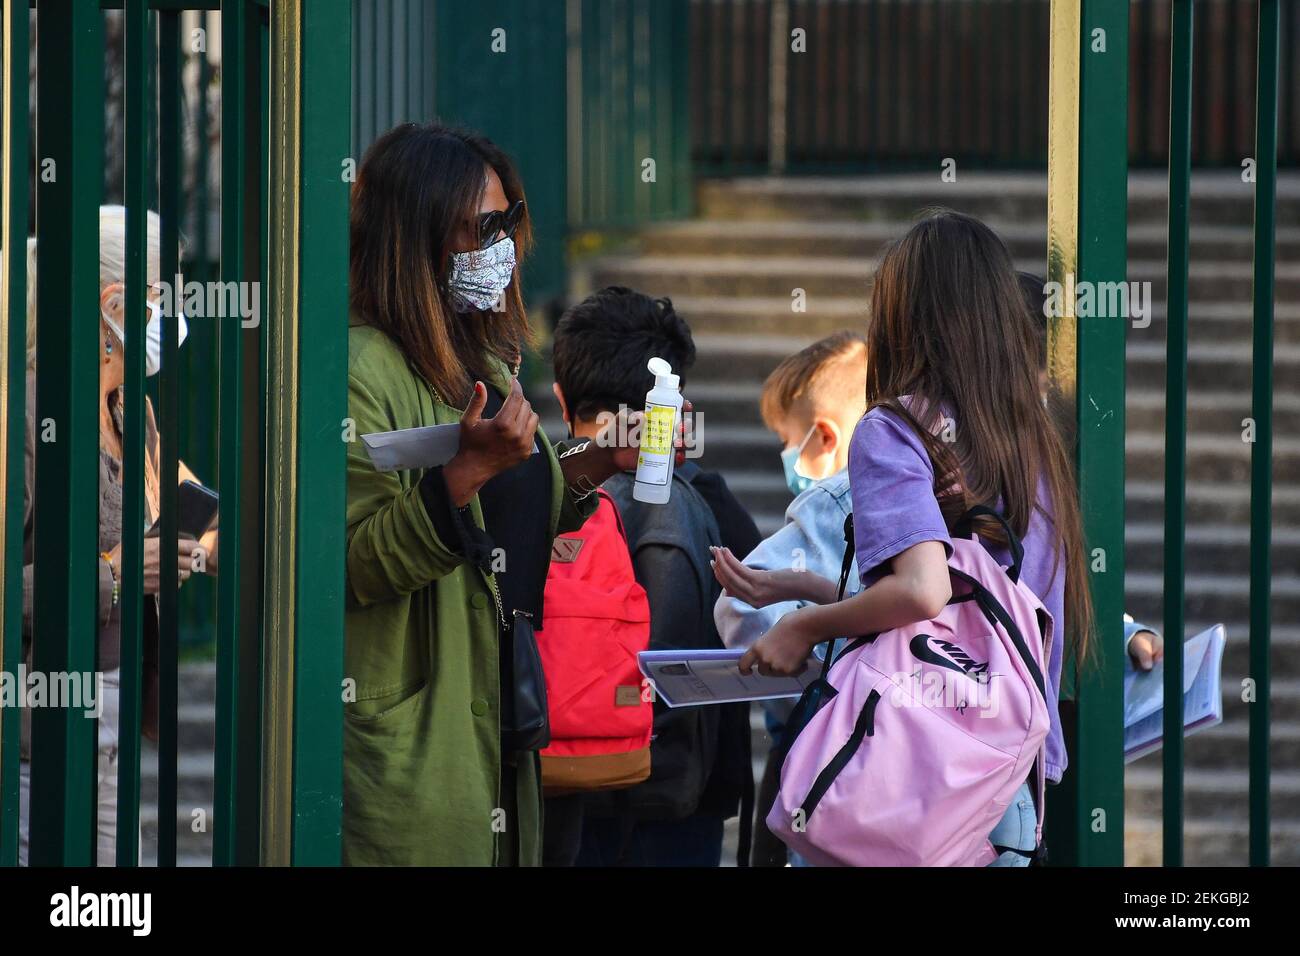 Students returns back to school during the Covid-19 pandemic in the college la Cerisaie in Charenton-le-Pont, Val de Marne, France on September 2, 2020. (Photo by Lionel Urman/Sipa USA) Stock Photo